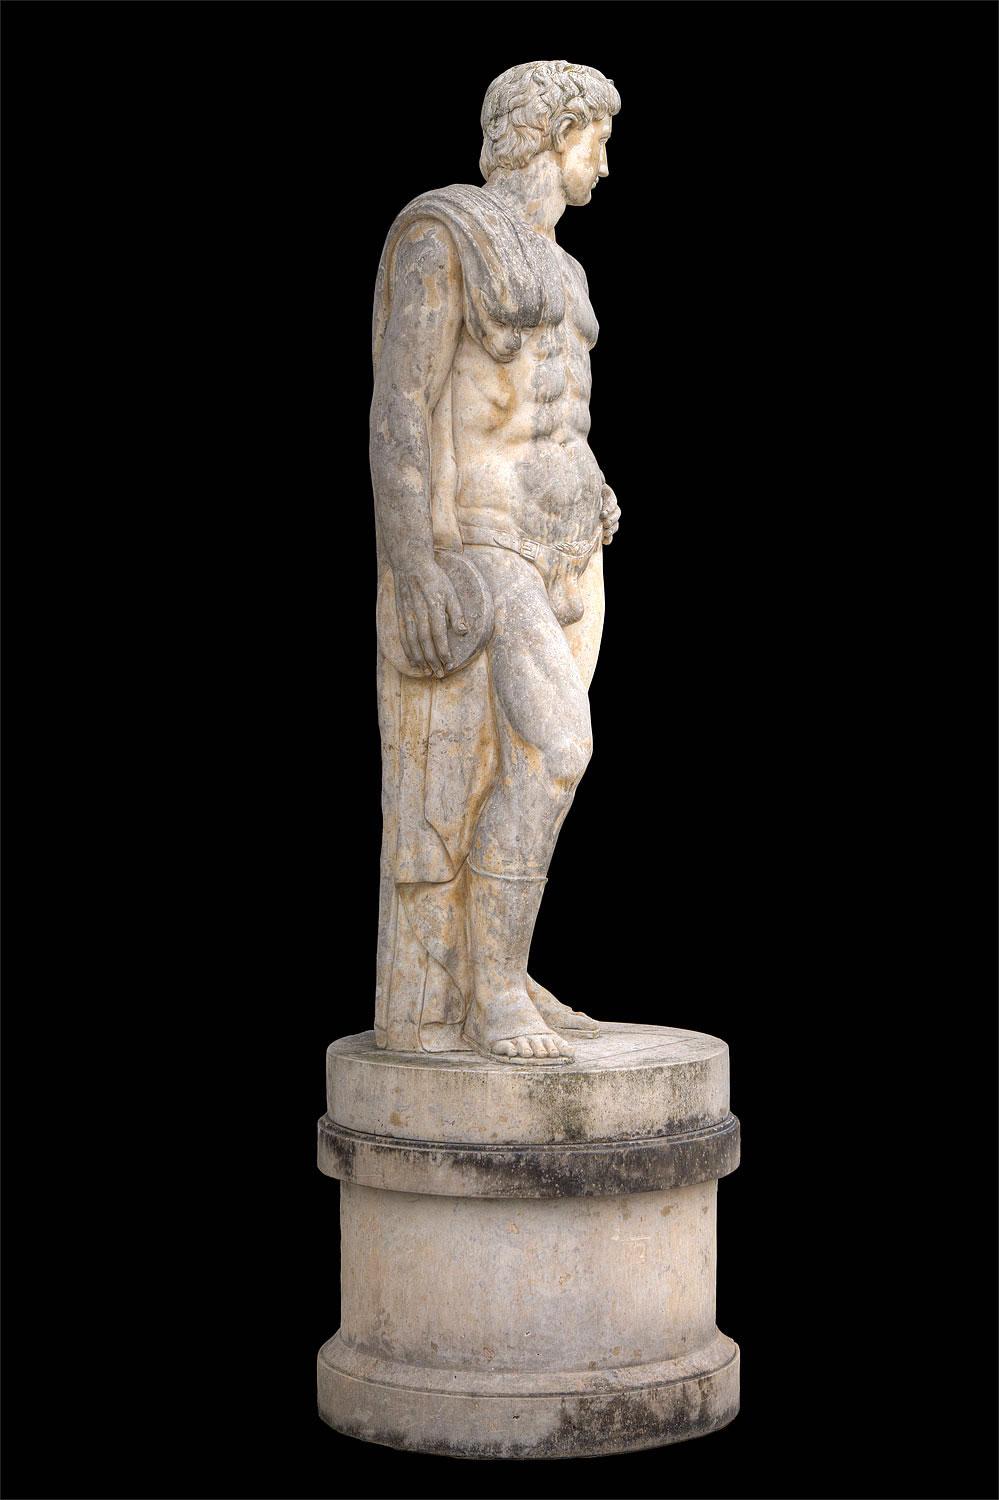  Monumental Italian Rationalist Marble Sculptures of Hercules and Discobolo For Sale 5